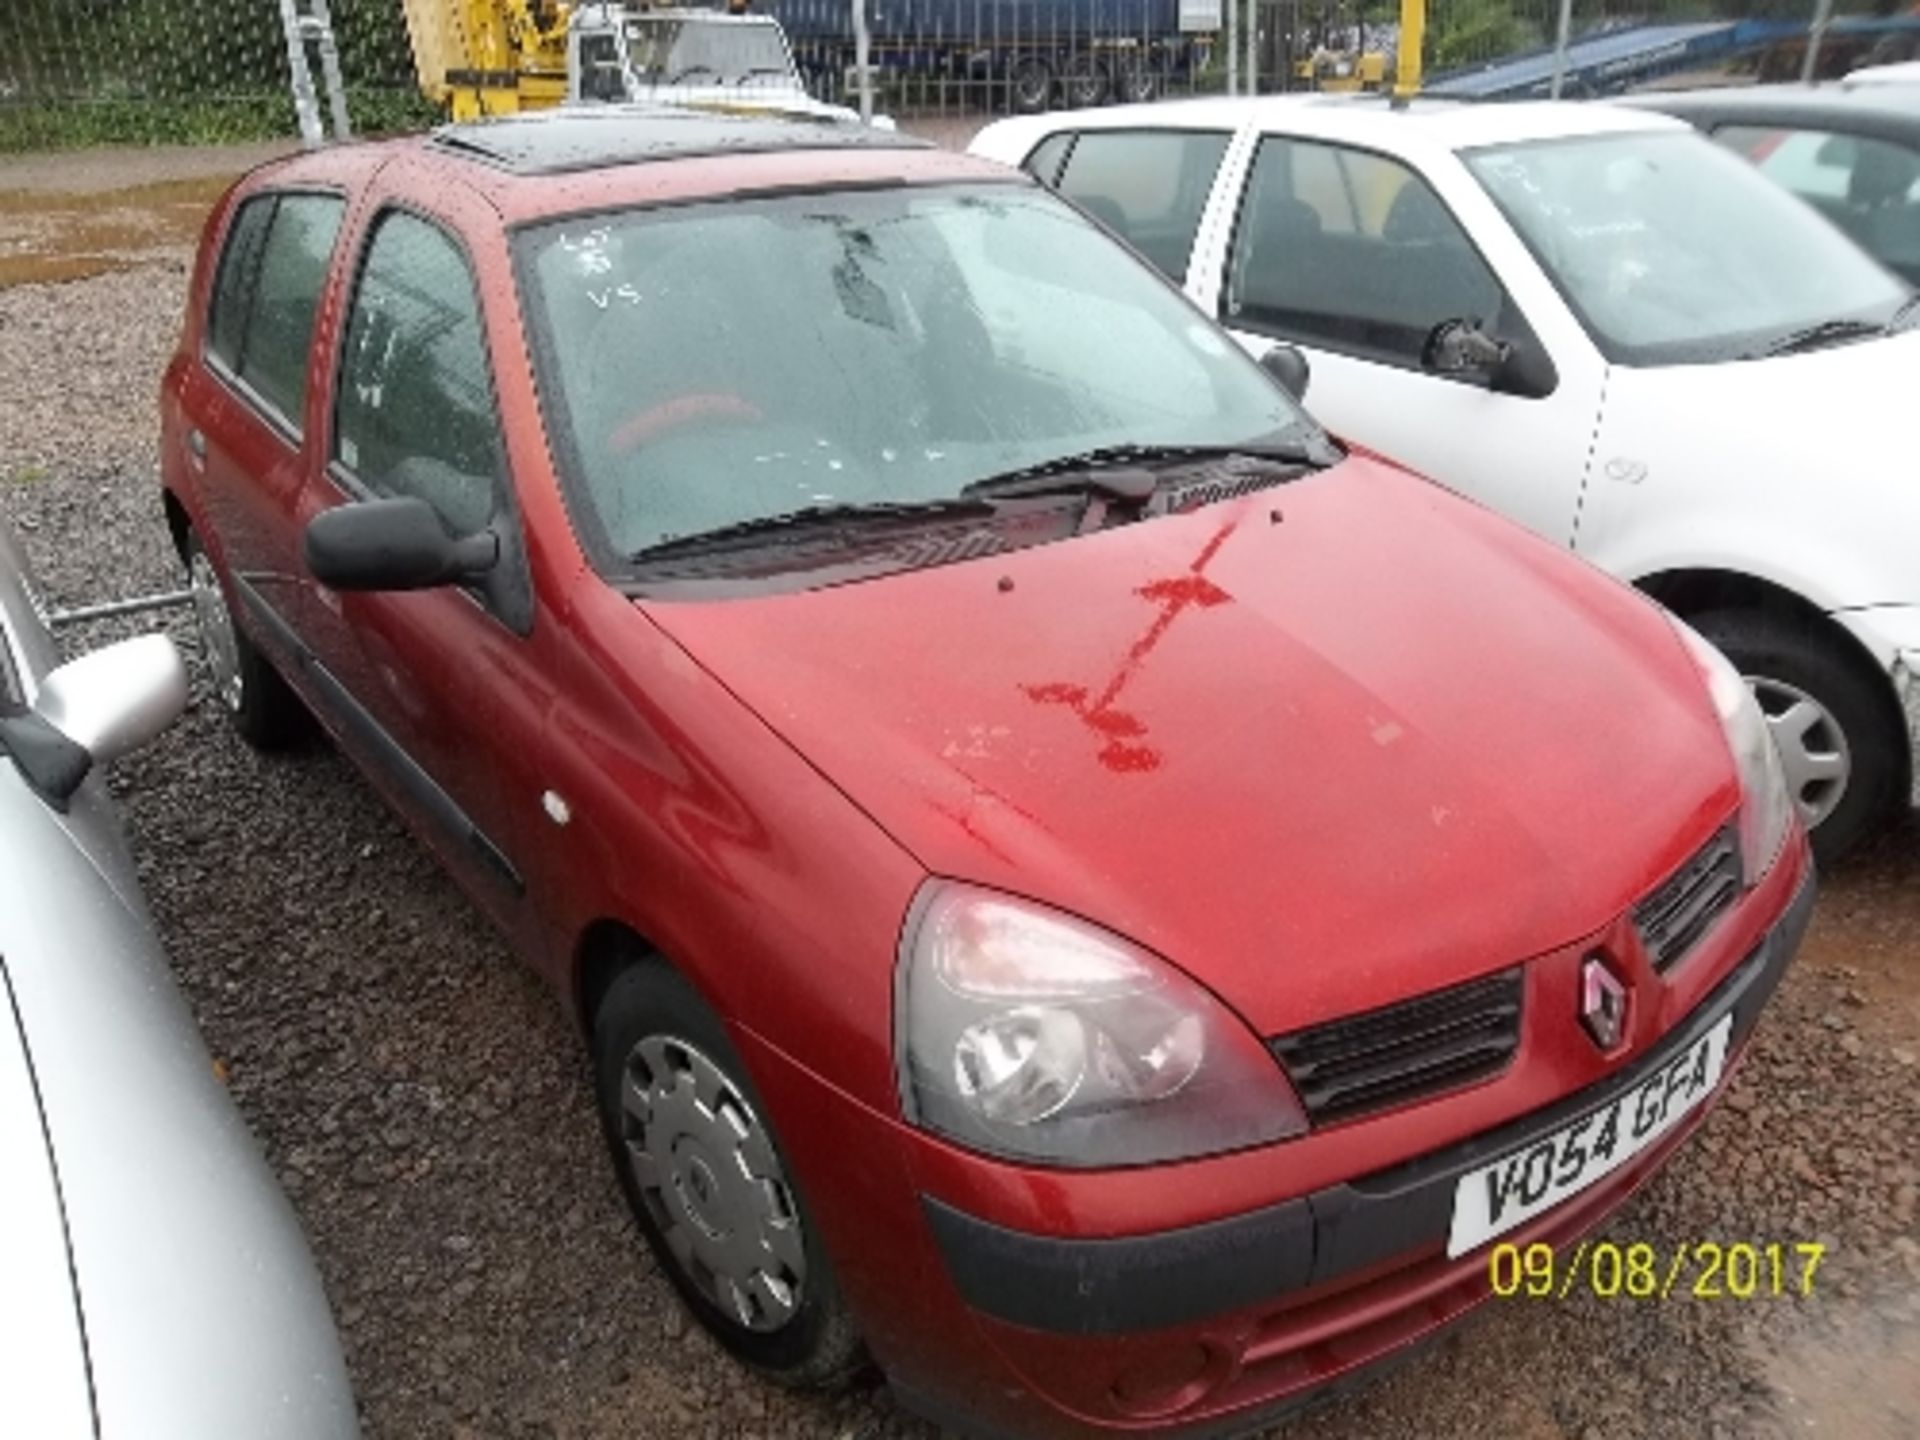 Renault Clio Expression 16V - VO54 GFA Date of registration: 29.09.2004 1390cc, petrol, 4 speed - Image 2 of 4